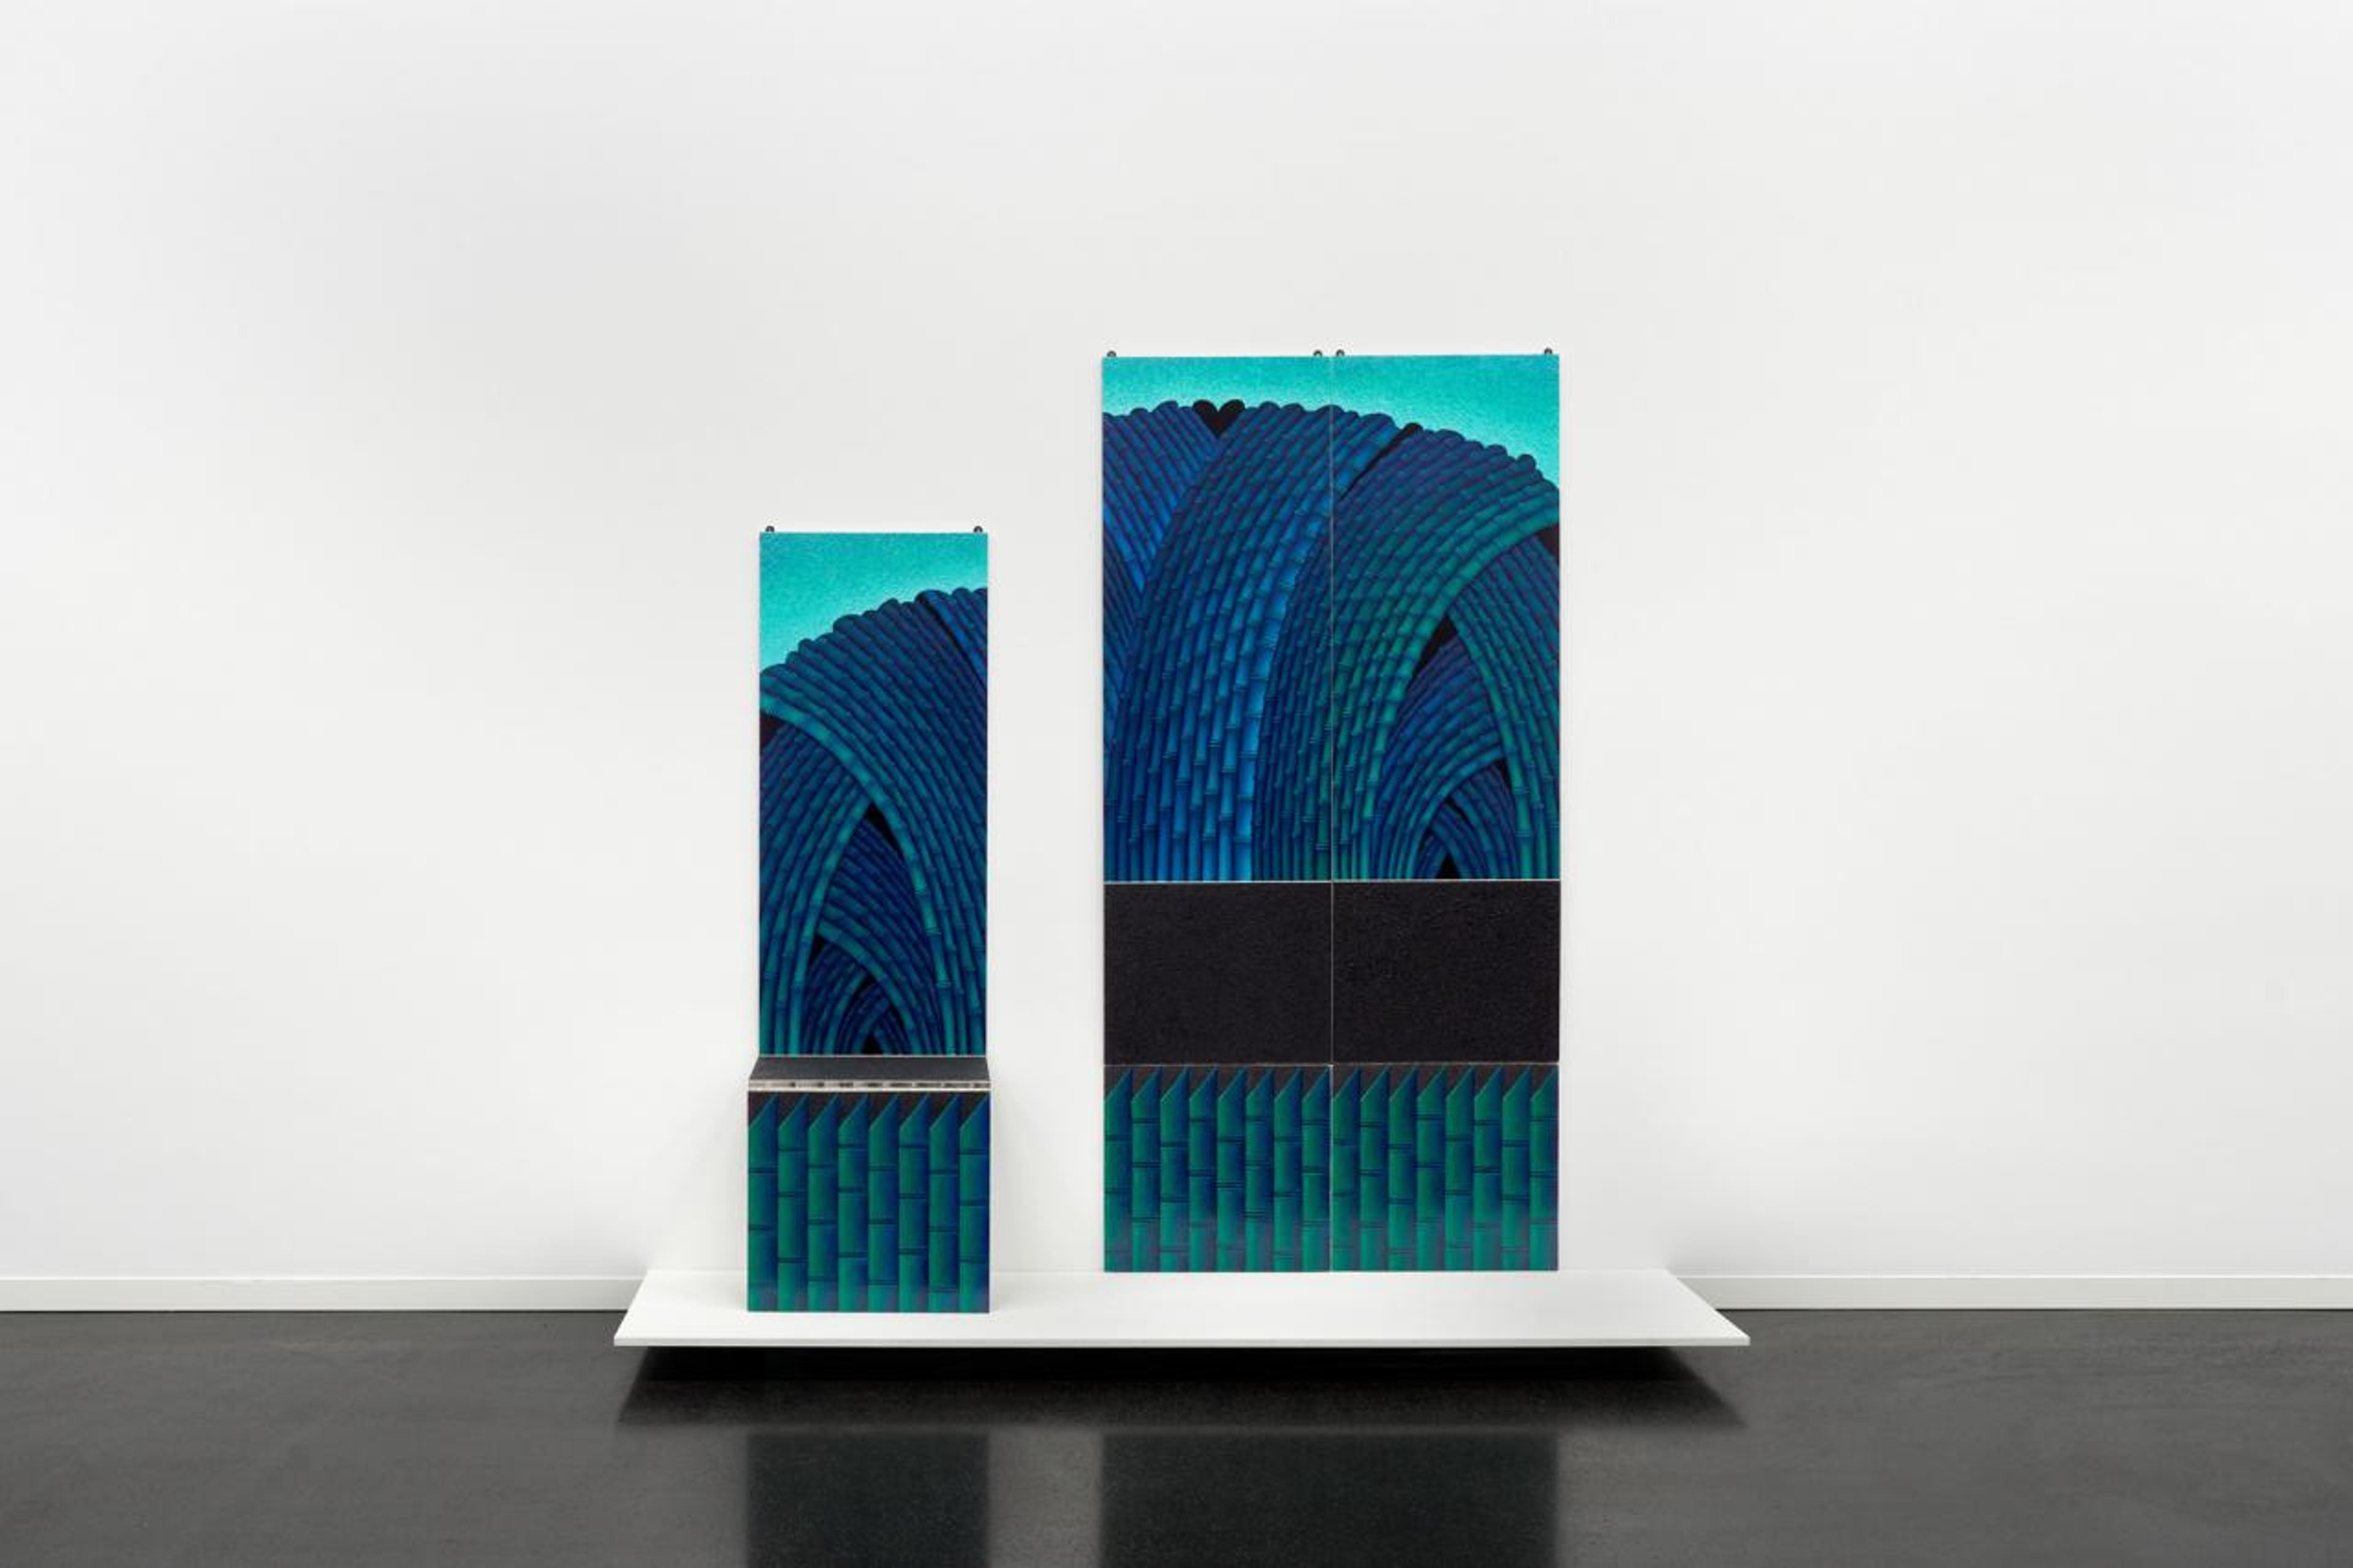 Yong Xiang Li, a break (by the bamboo wave), 2022, acrylic, sand, and varnish on gessoed wood panel, stainless steel hinge, 205 x 150 x 45 cm